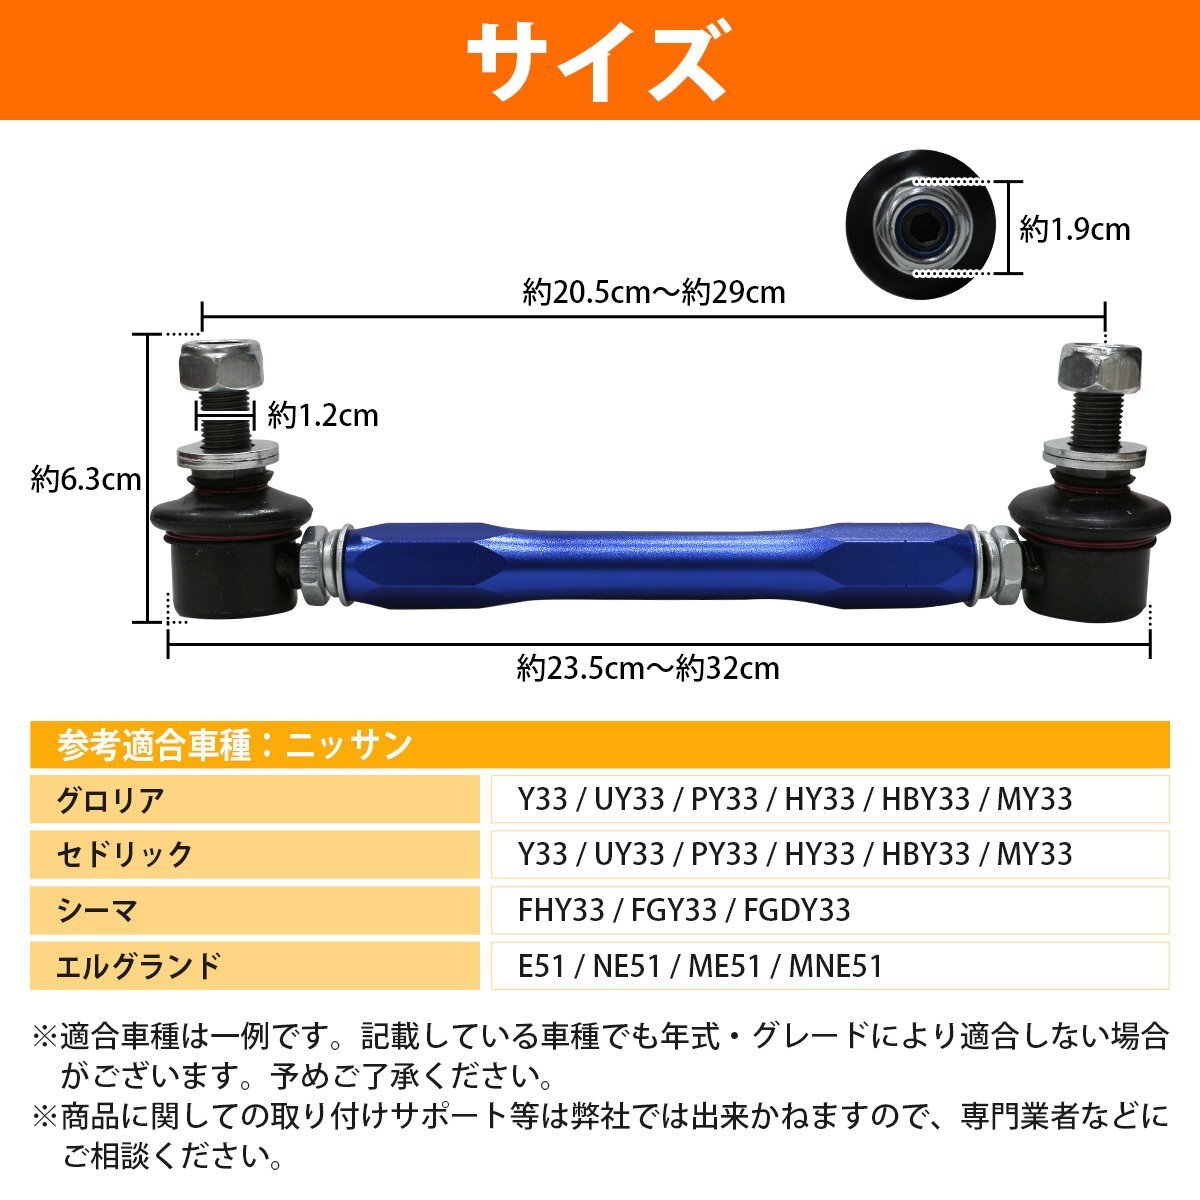 [ new goods immediate payment ] Cima FHY33 FGY33 FGDY33 front blue / blue adjustment type stabilizer link left right set 